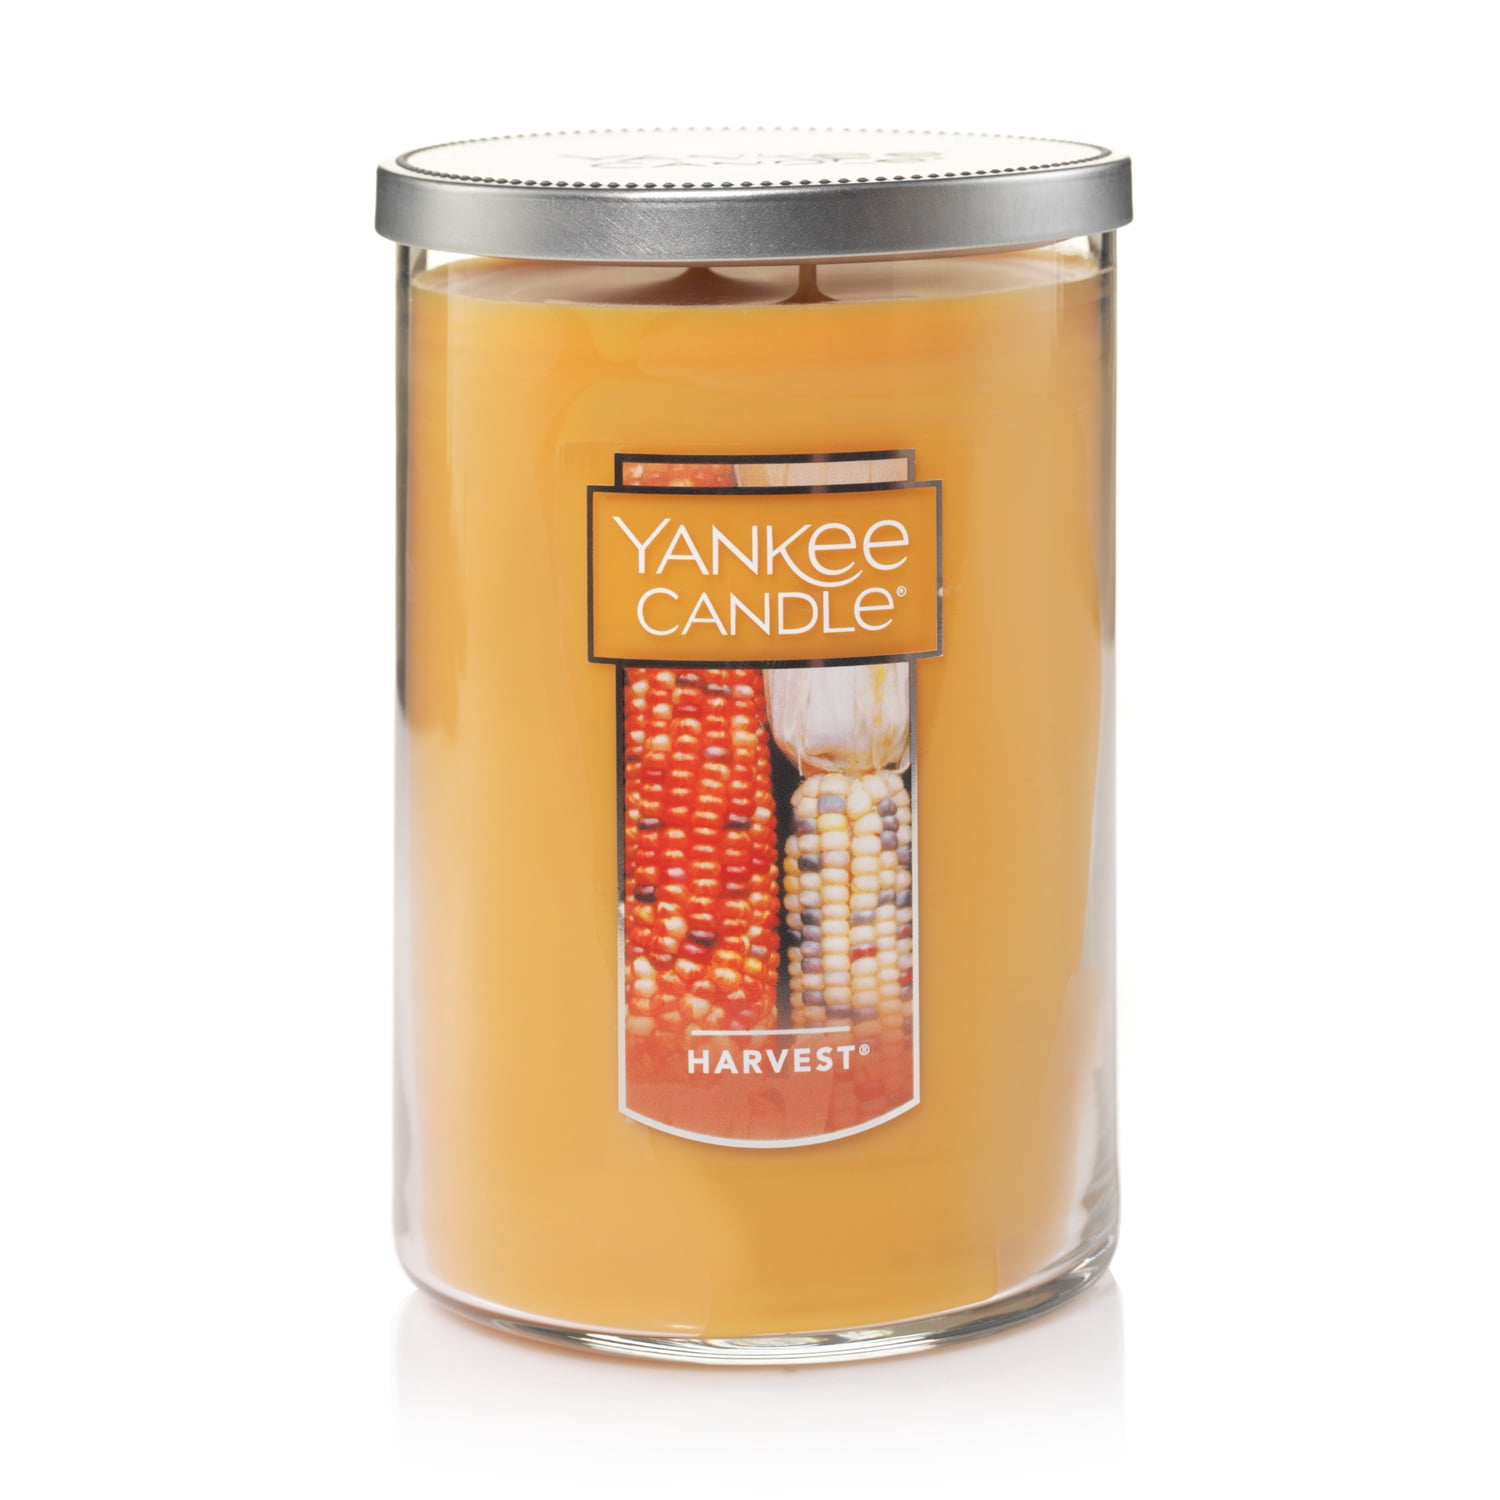 New Yankee Candle Harvest 22-oz Large 2-Wick Tumbler Candle Fall Winter